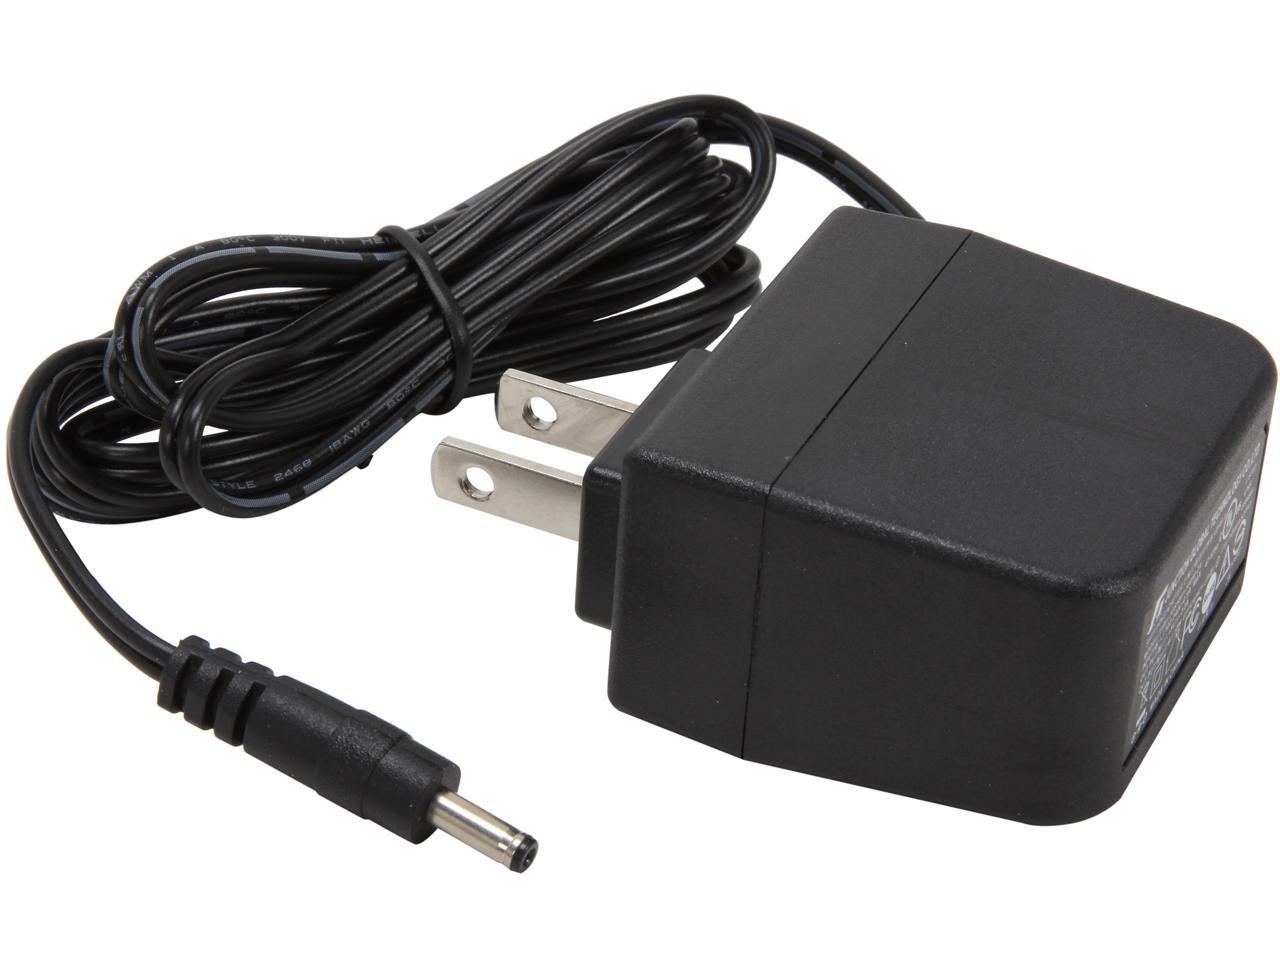 Ac Power Adapter For Usb Active Repeater Cable